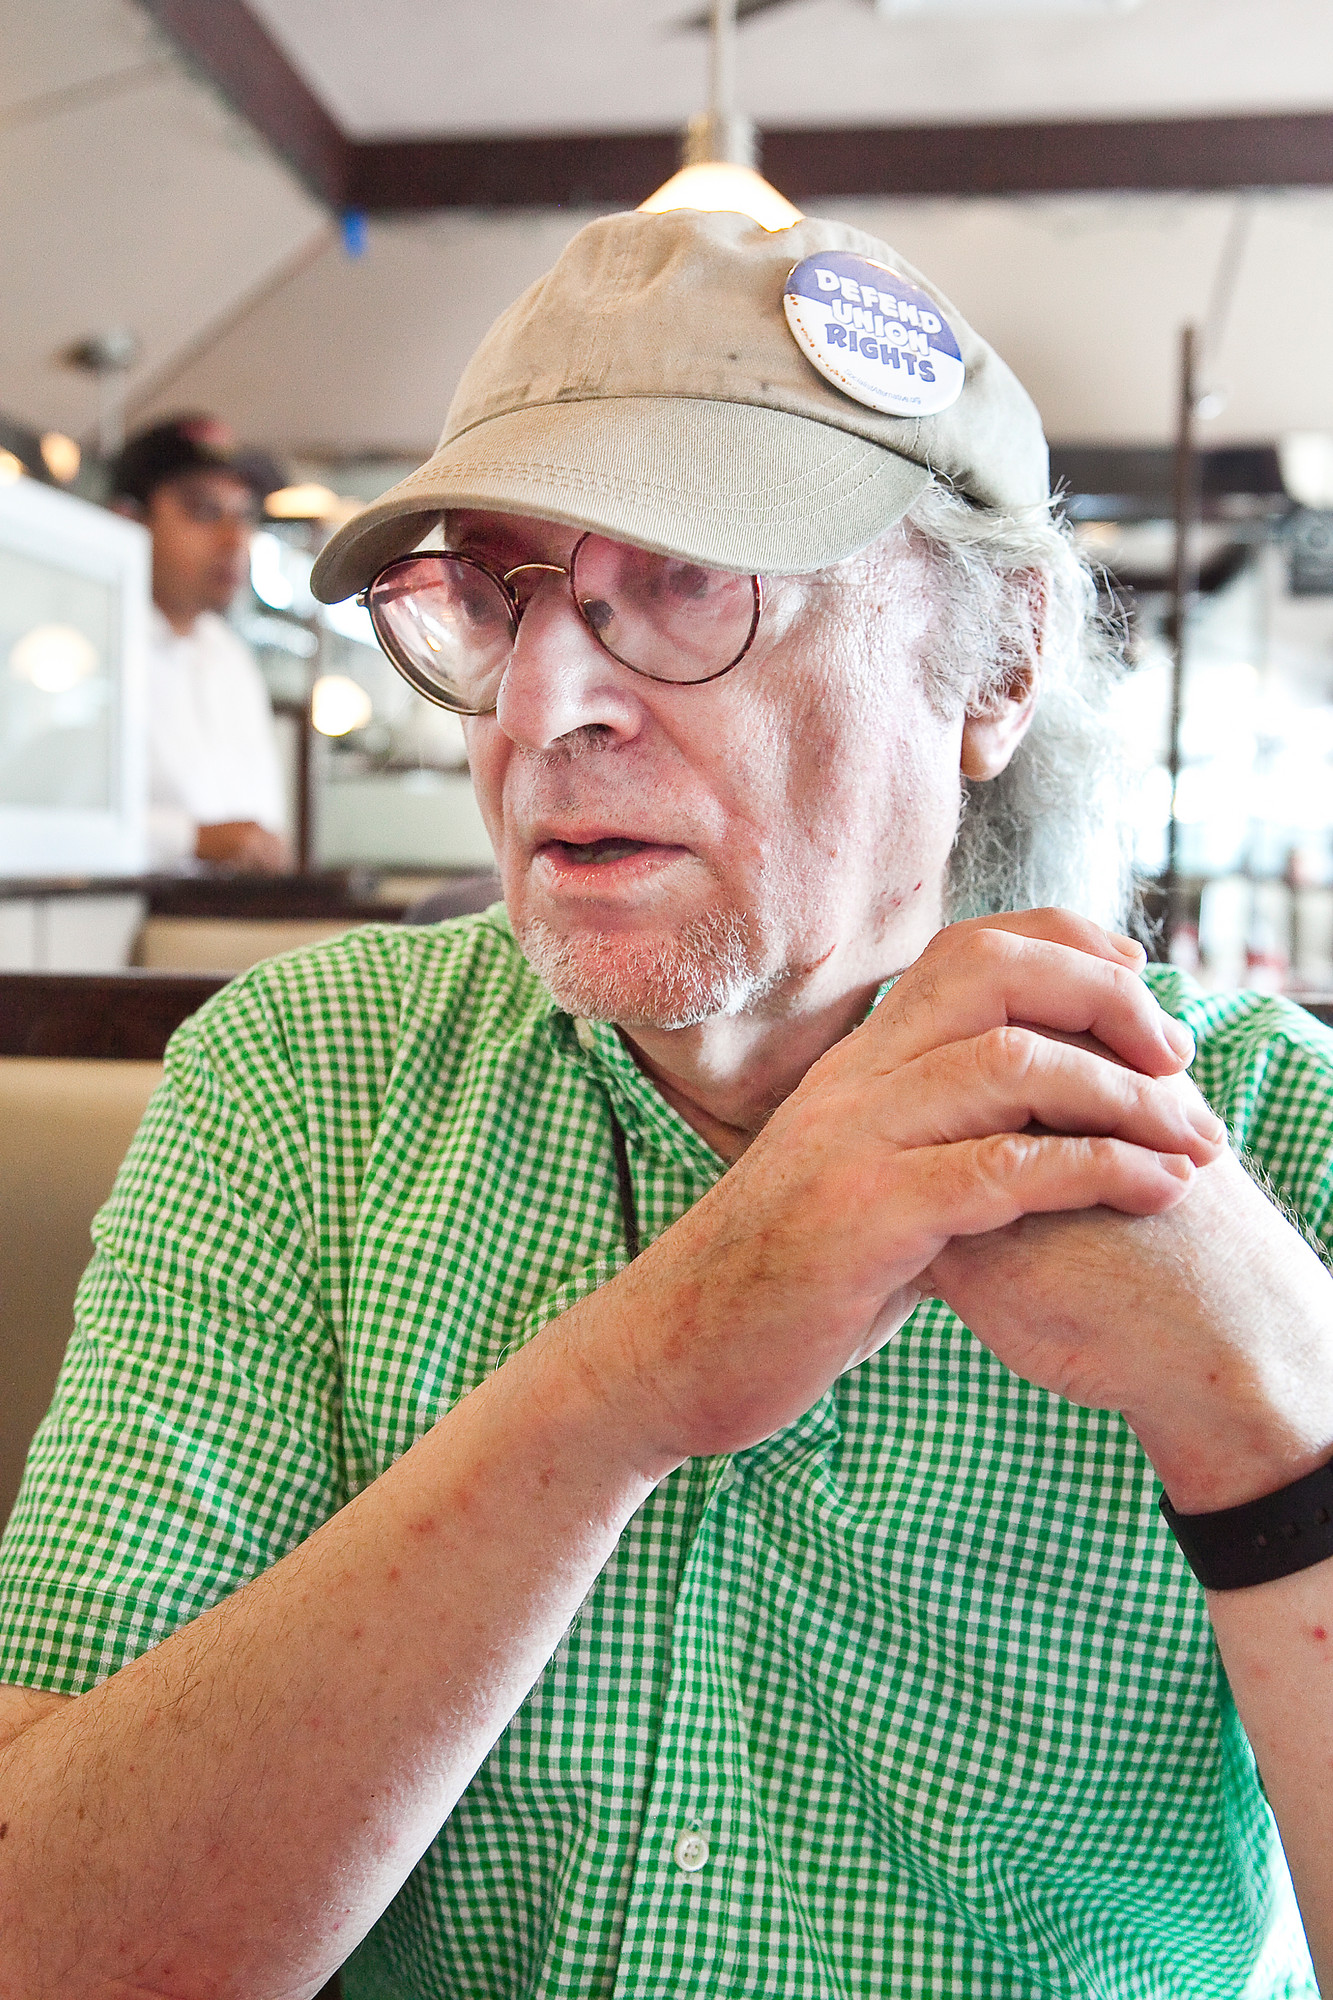 John Reynolds, who is running for City Council District 11 on the Green Party line, discussed his platform with ‘The Press’ at Tibbett Diner on Monday.